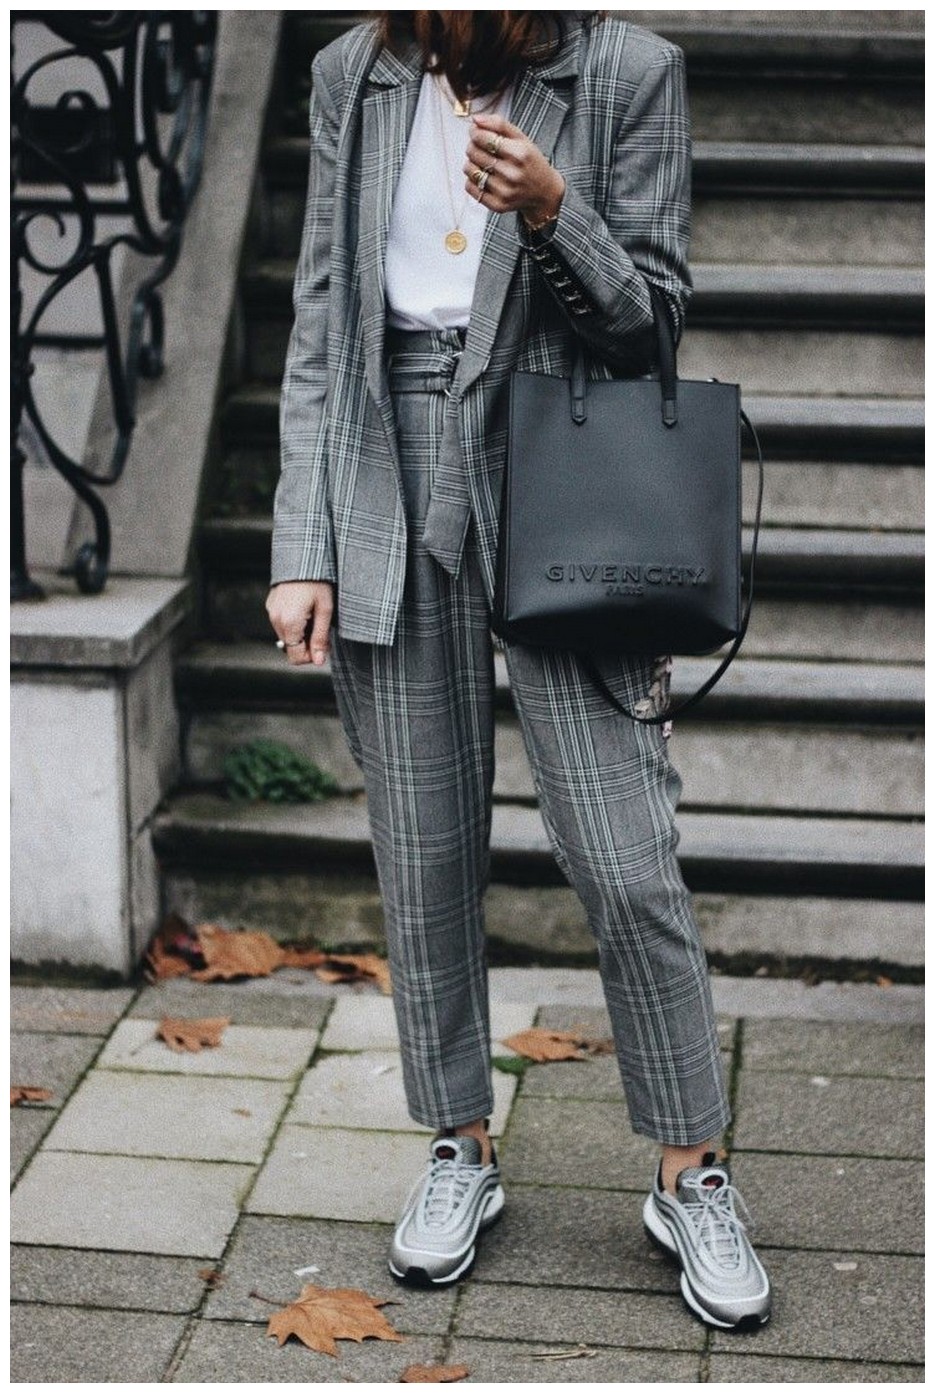 50+ Amazing Women Suits and Sneaker Trend